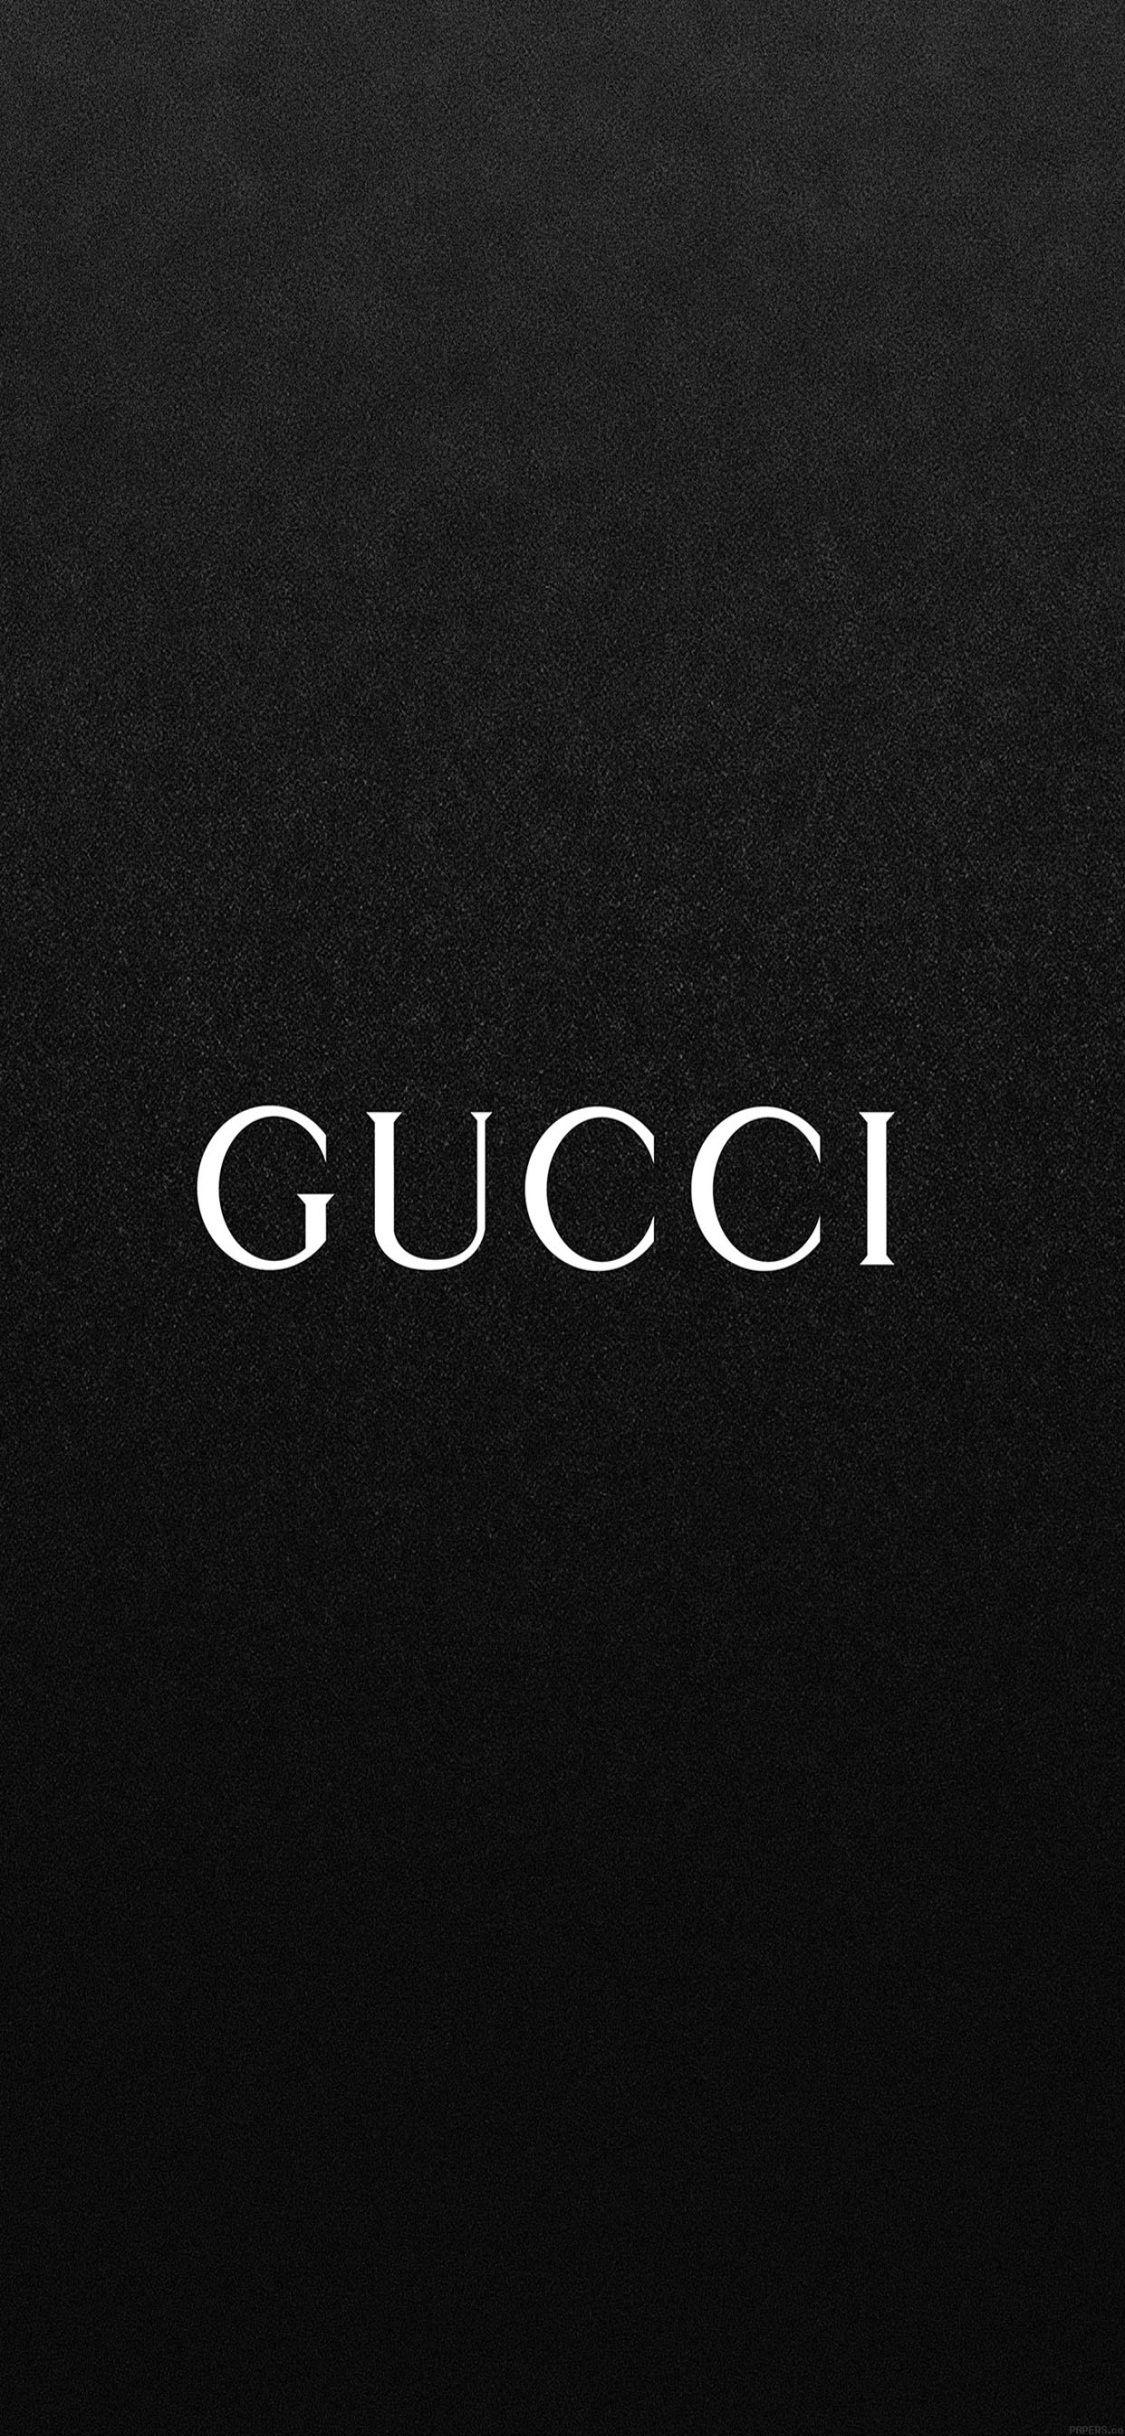 Gucci Aesthetic Wallpapers - Top Free Gucci Aesthetic Backgrounds ...